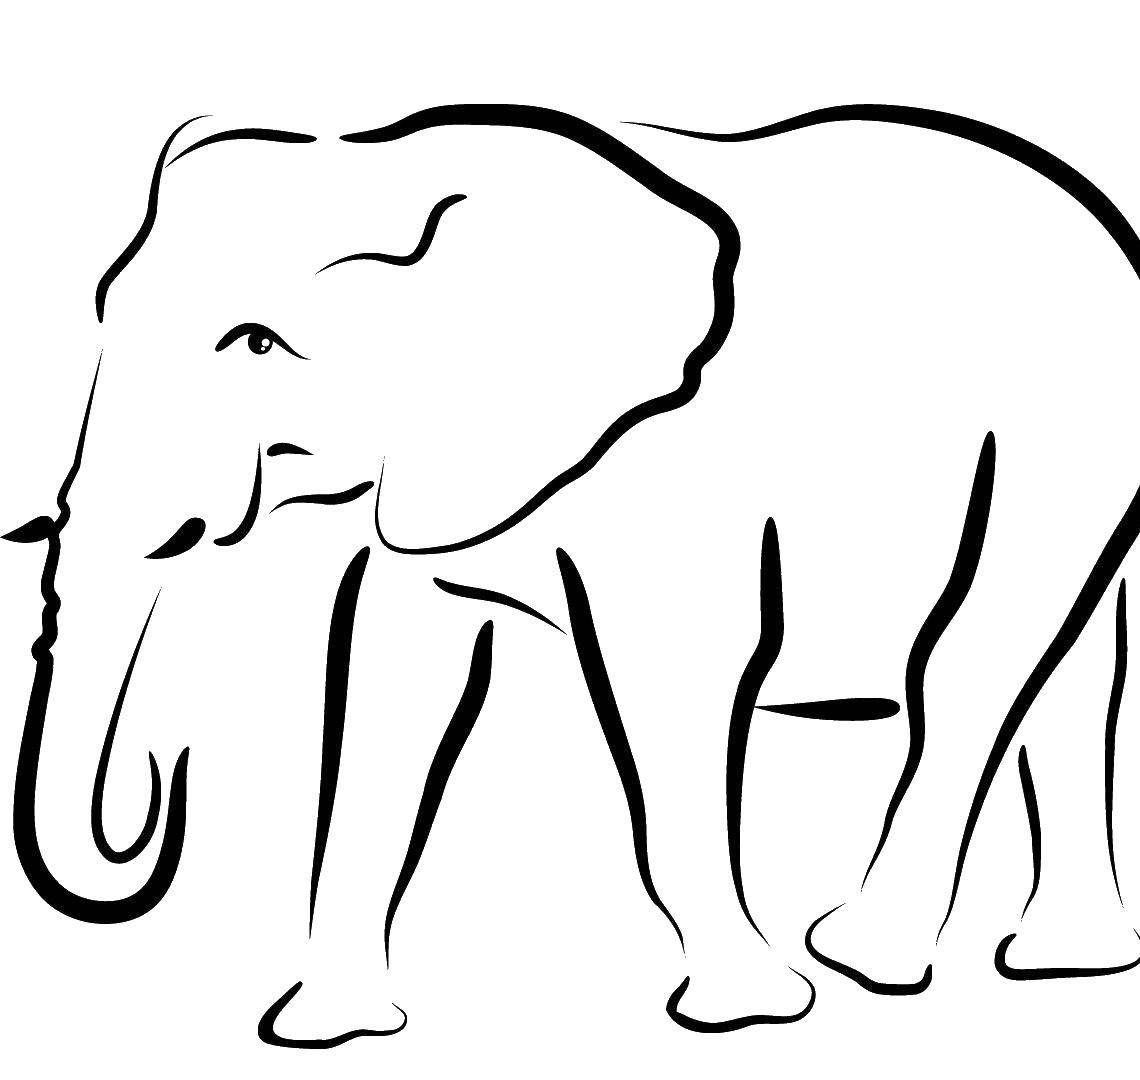 Coloring Elephant. Category The contours of animals. Tags:  elephant.